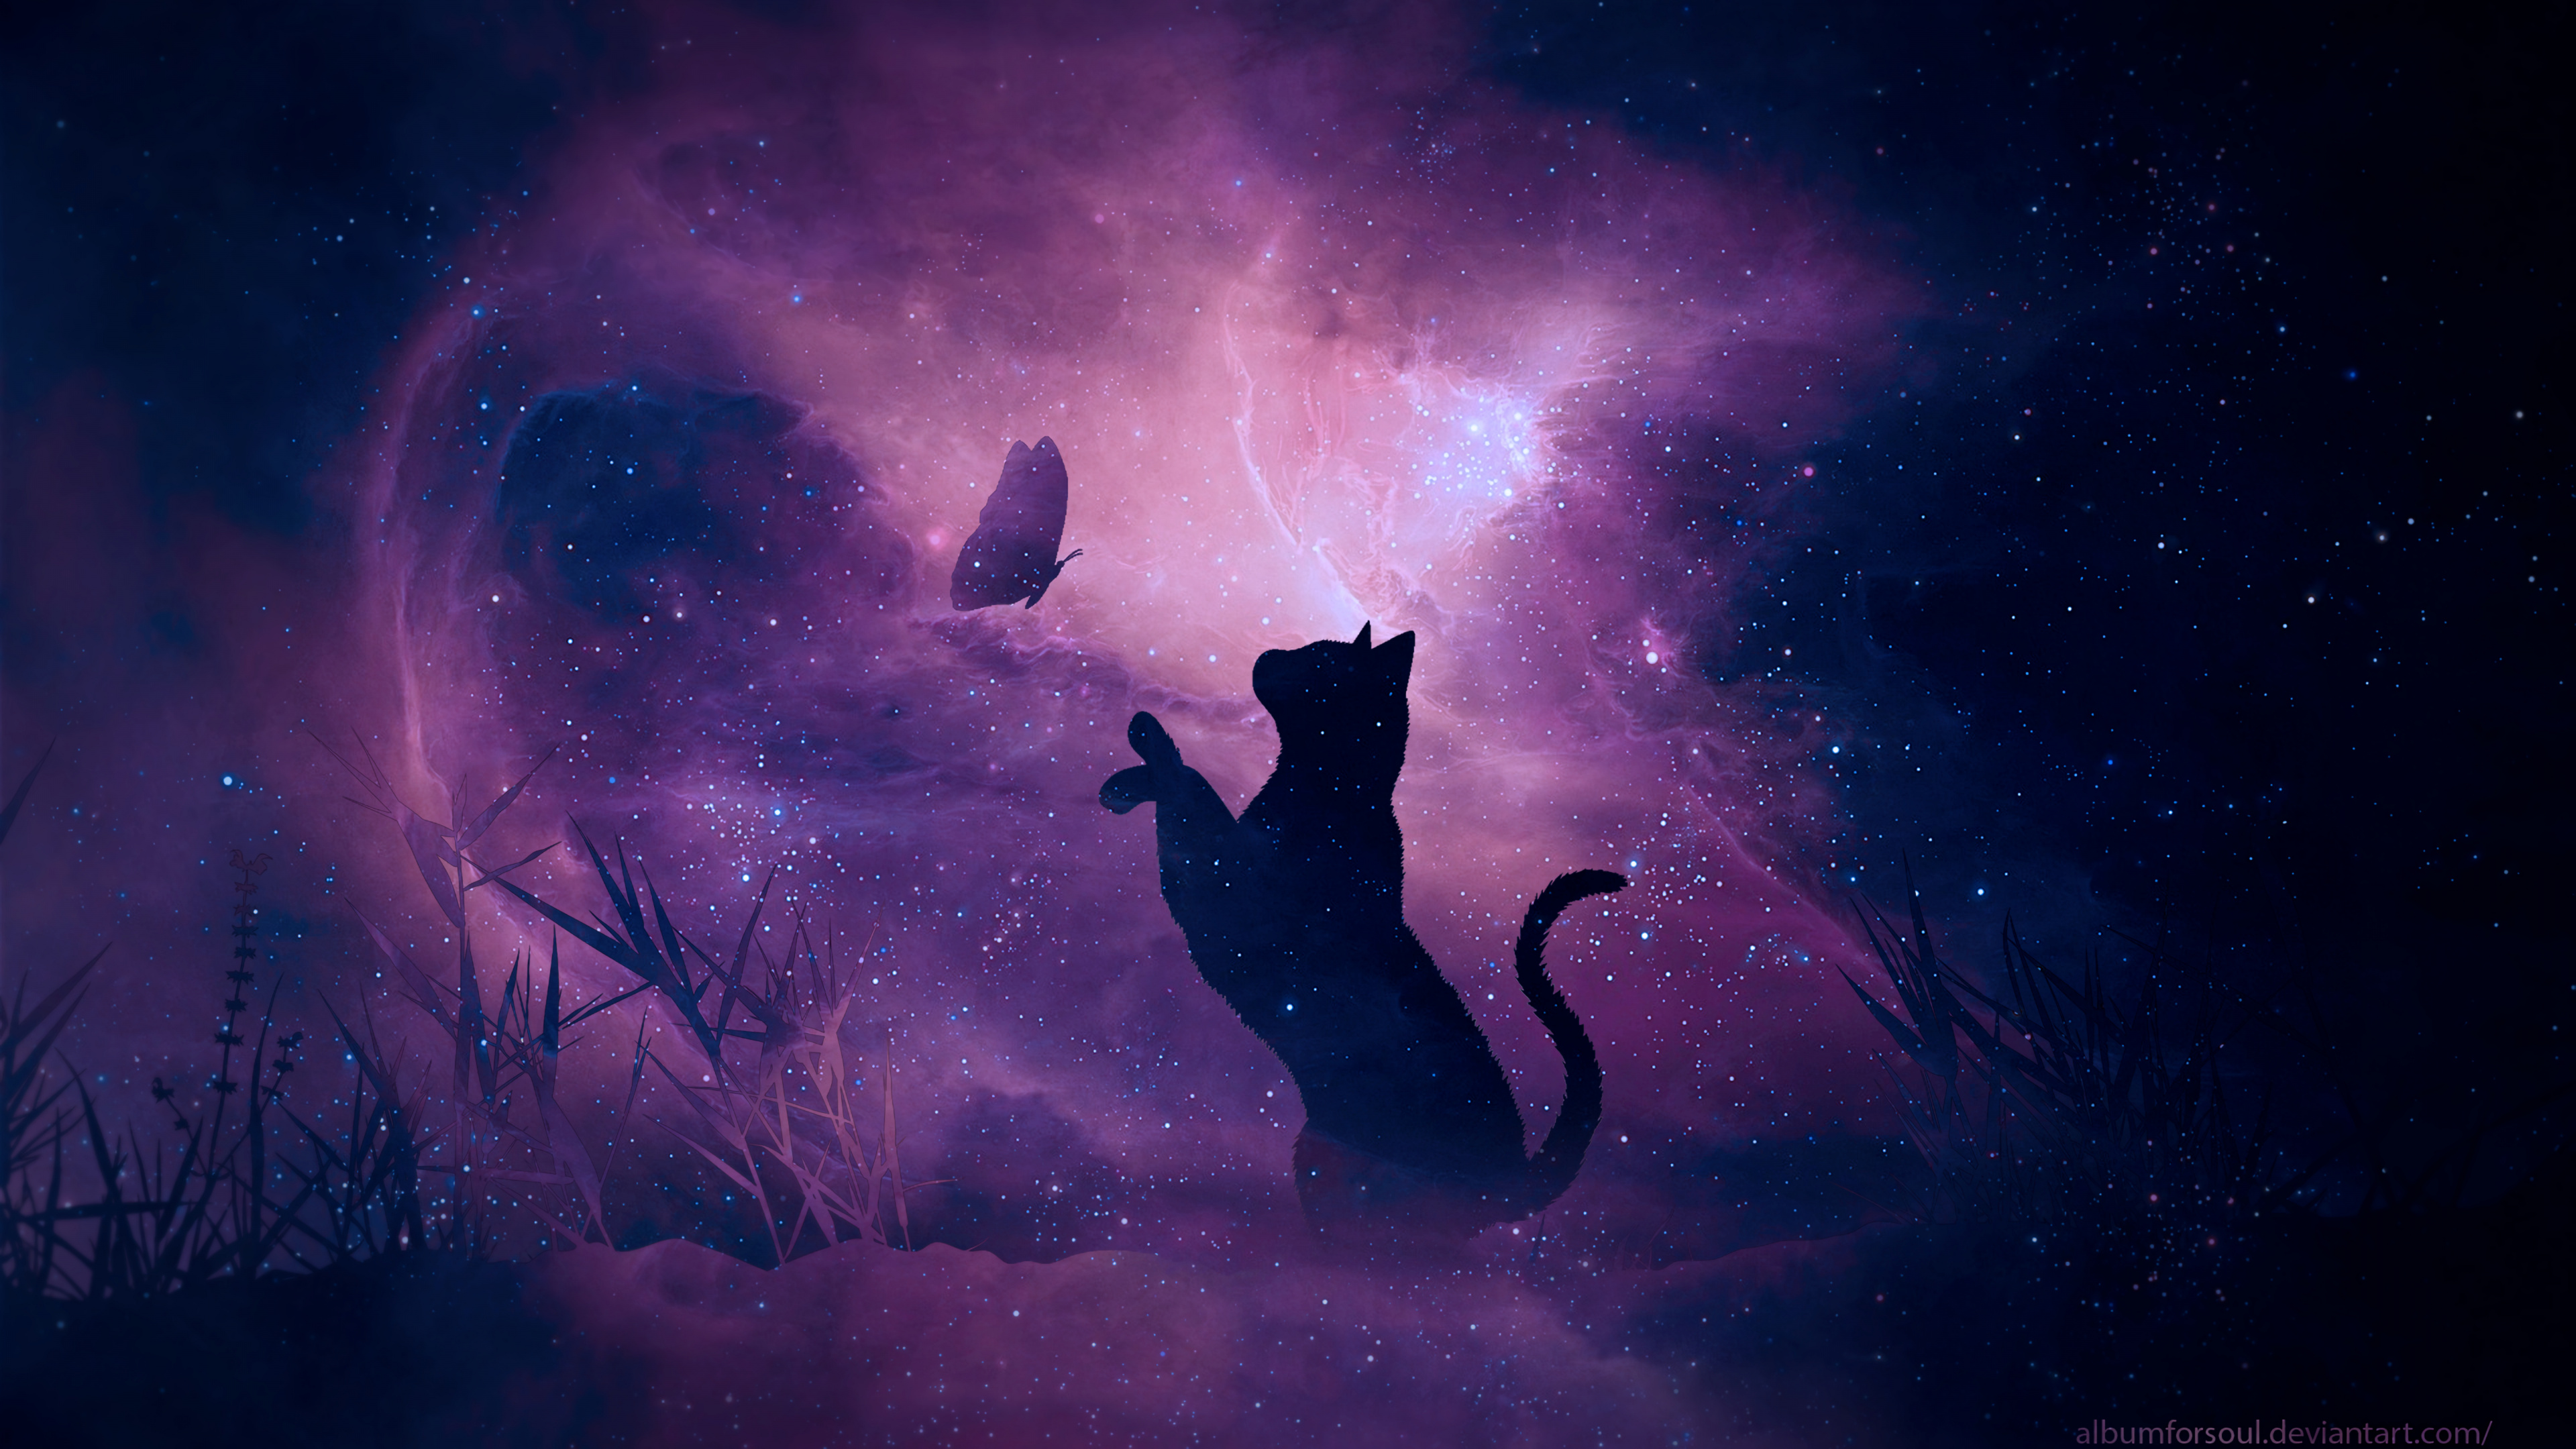 Black Cat on Grass Field During Night Time. Wallpaper in 3840x2160 Resolution